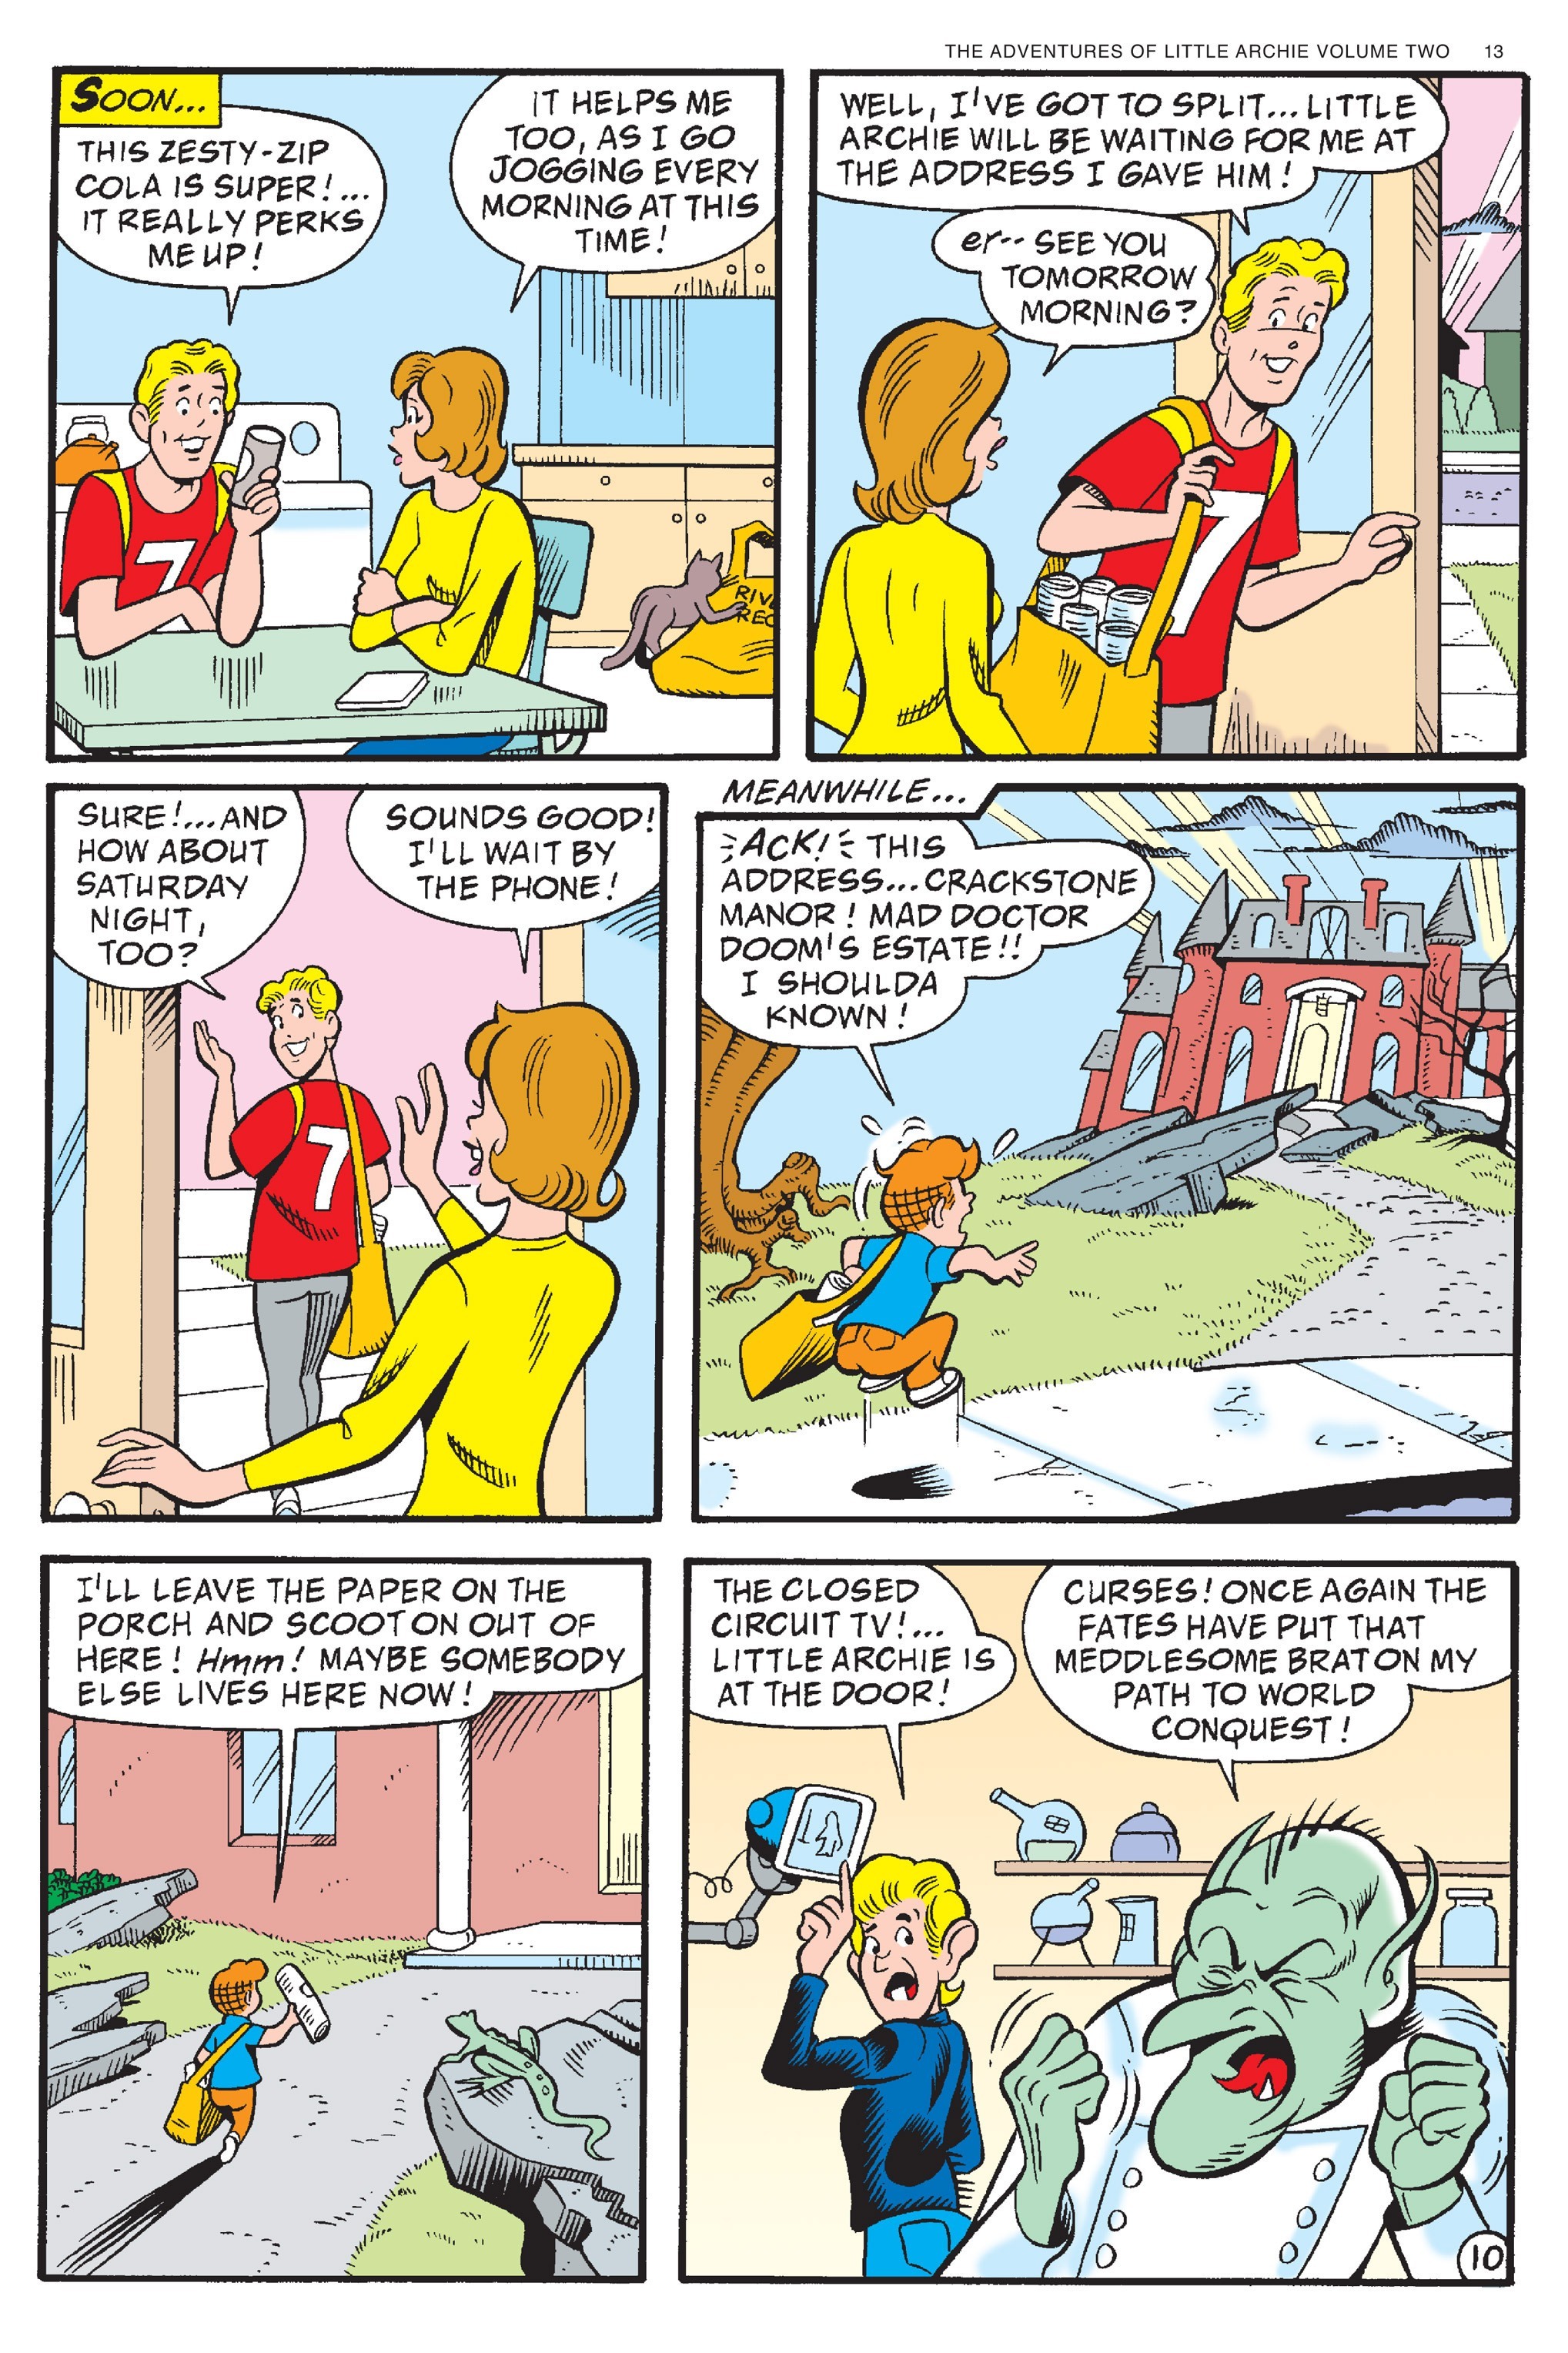 Read online Adventures of Little Archie comic -  Issue # TPB 2 - 14